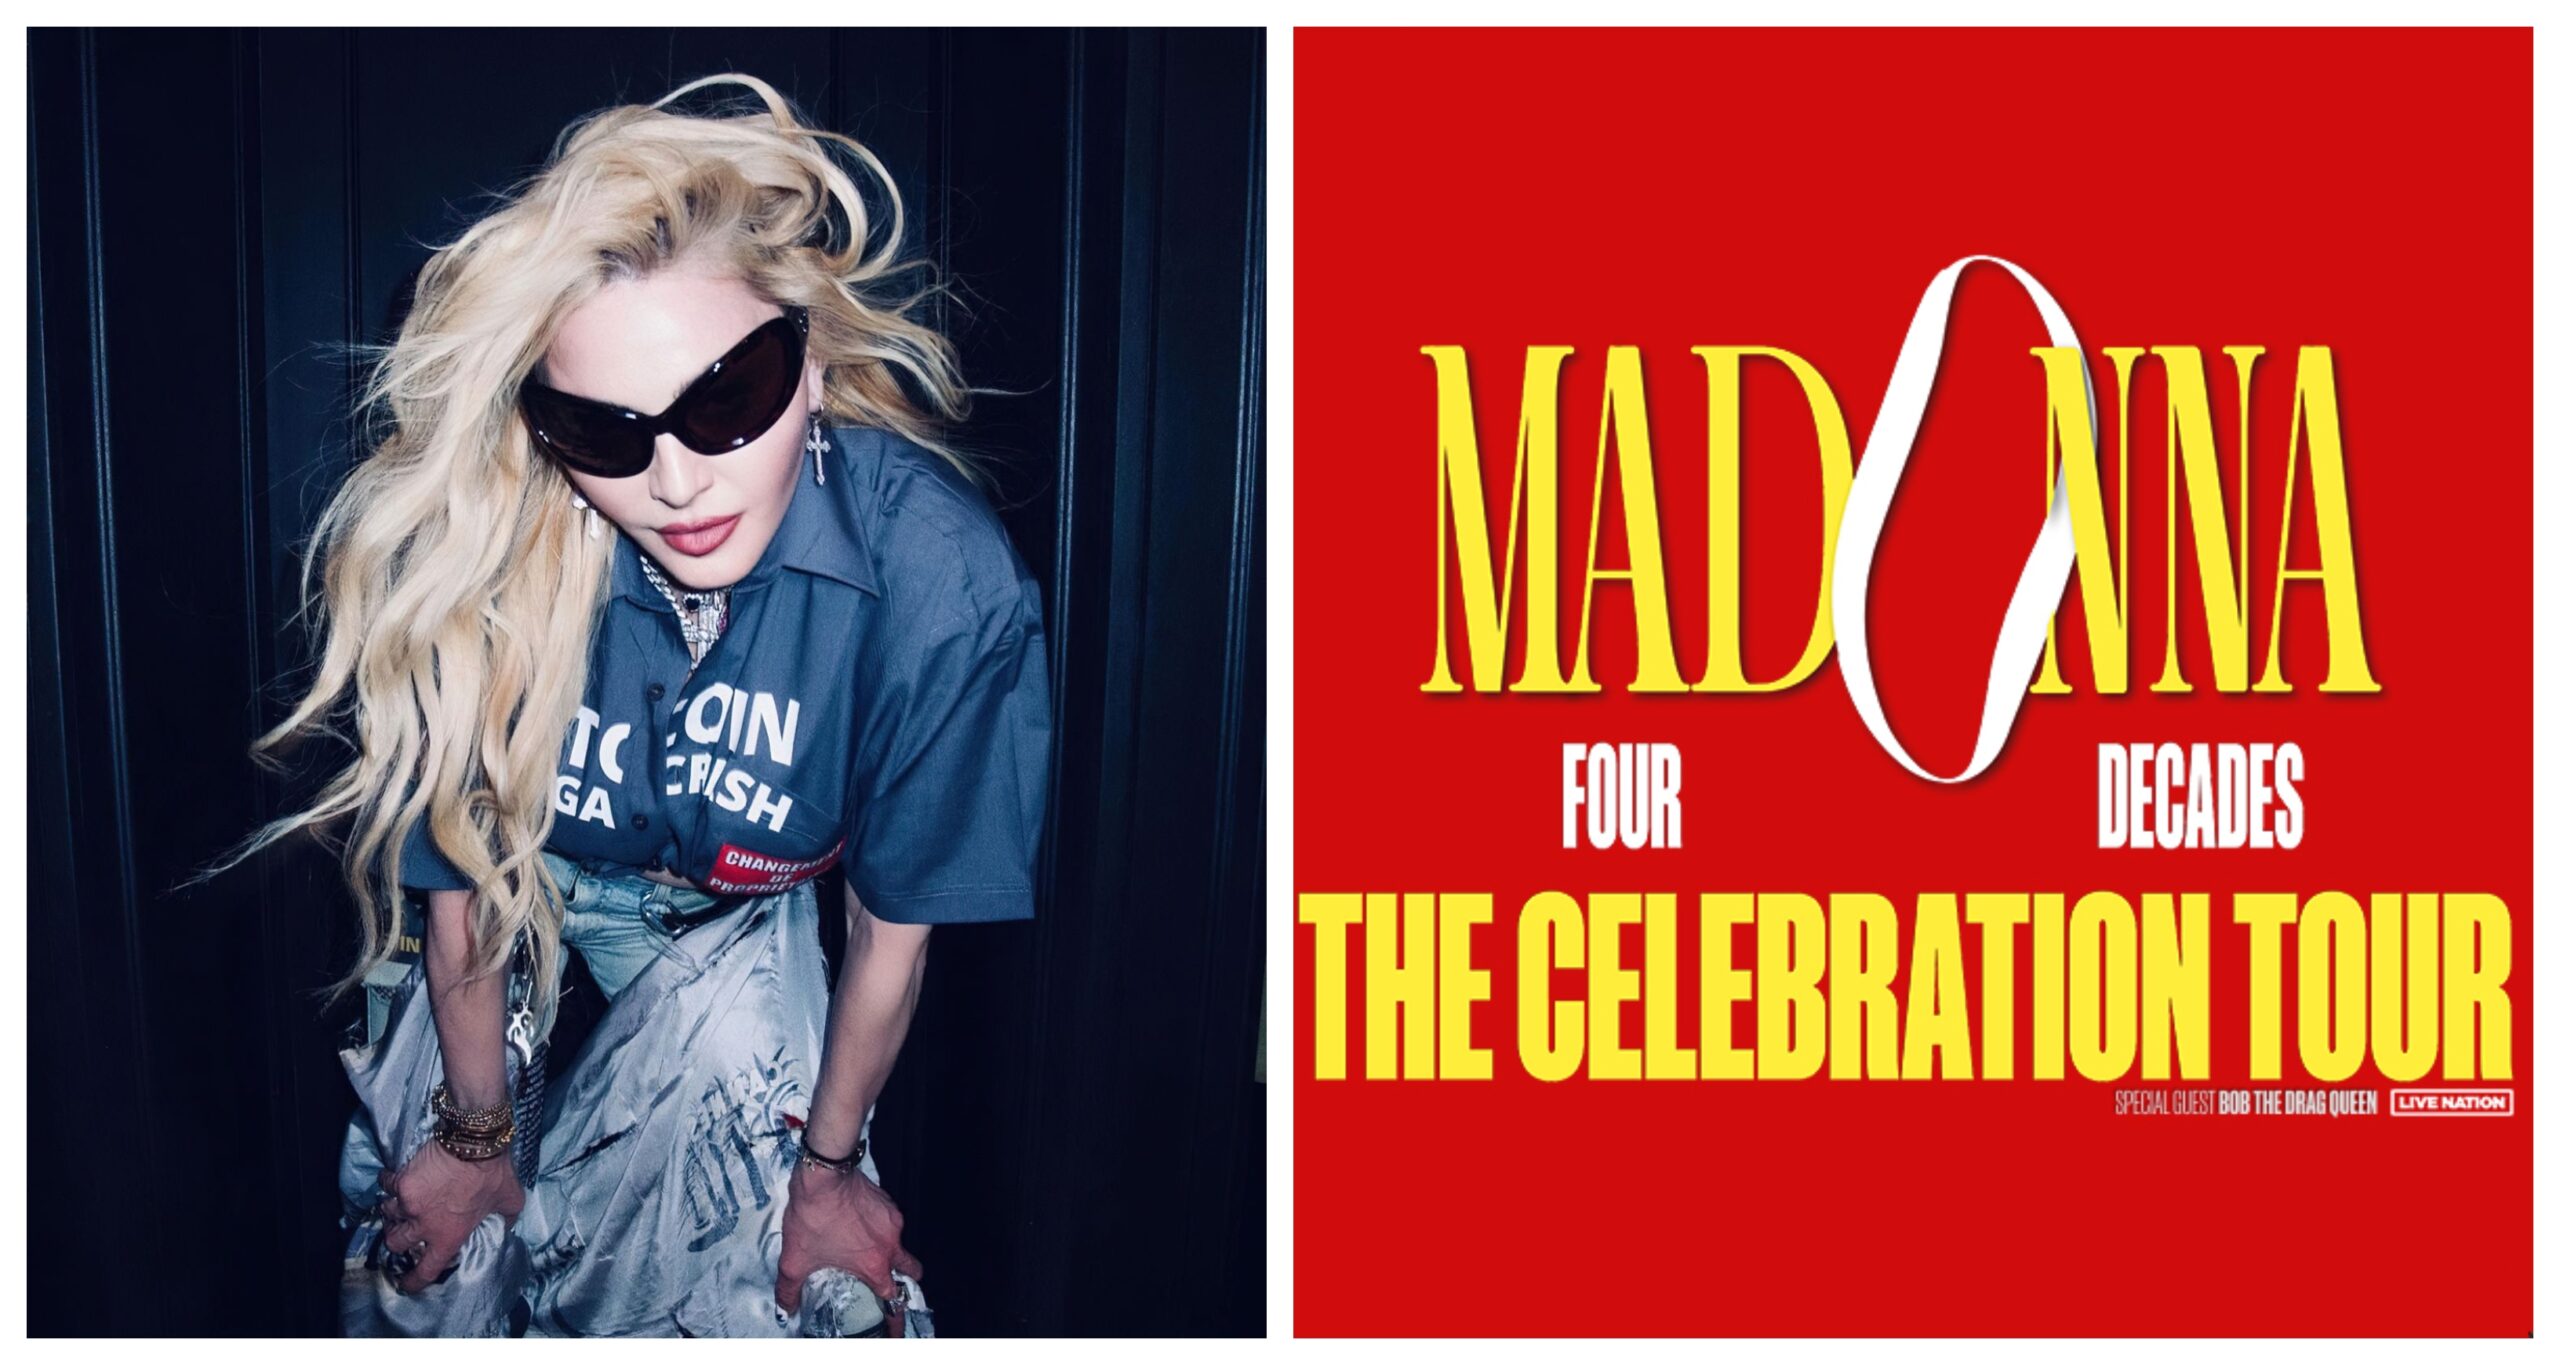 Madonna Announces Rescheduled North American Dates for 'The Celebration